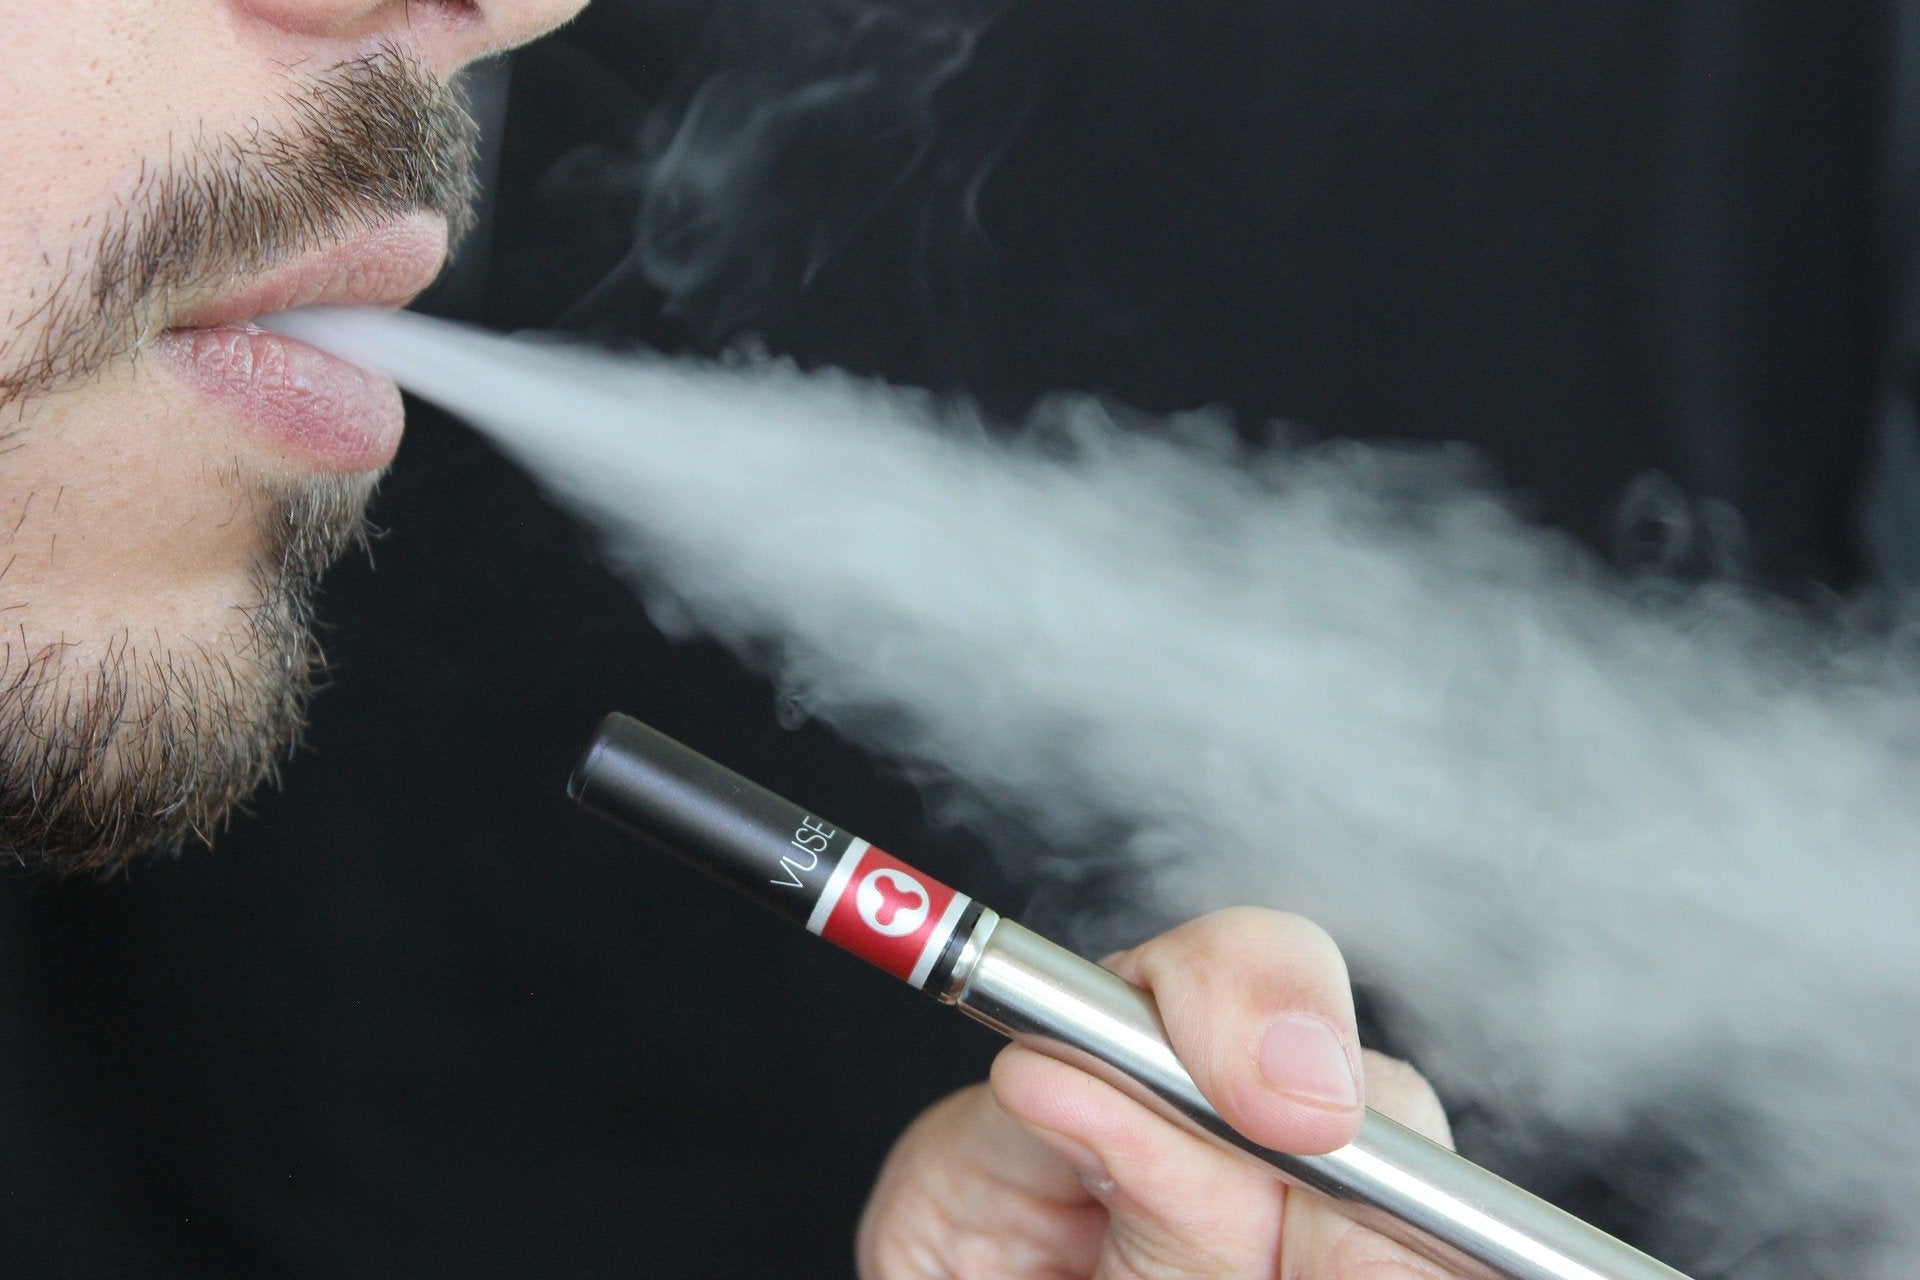 Classic vs. E-Cigarettes: How Much Nicotine Does Your Body Absorb - V8PR.uk